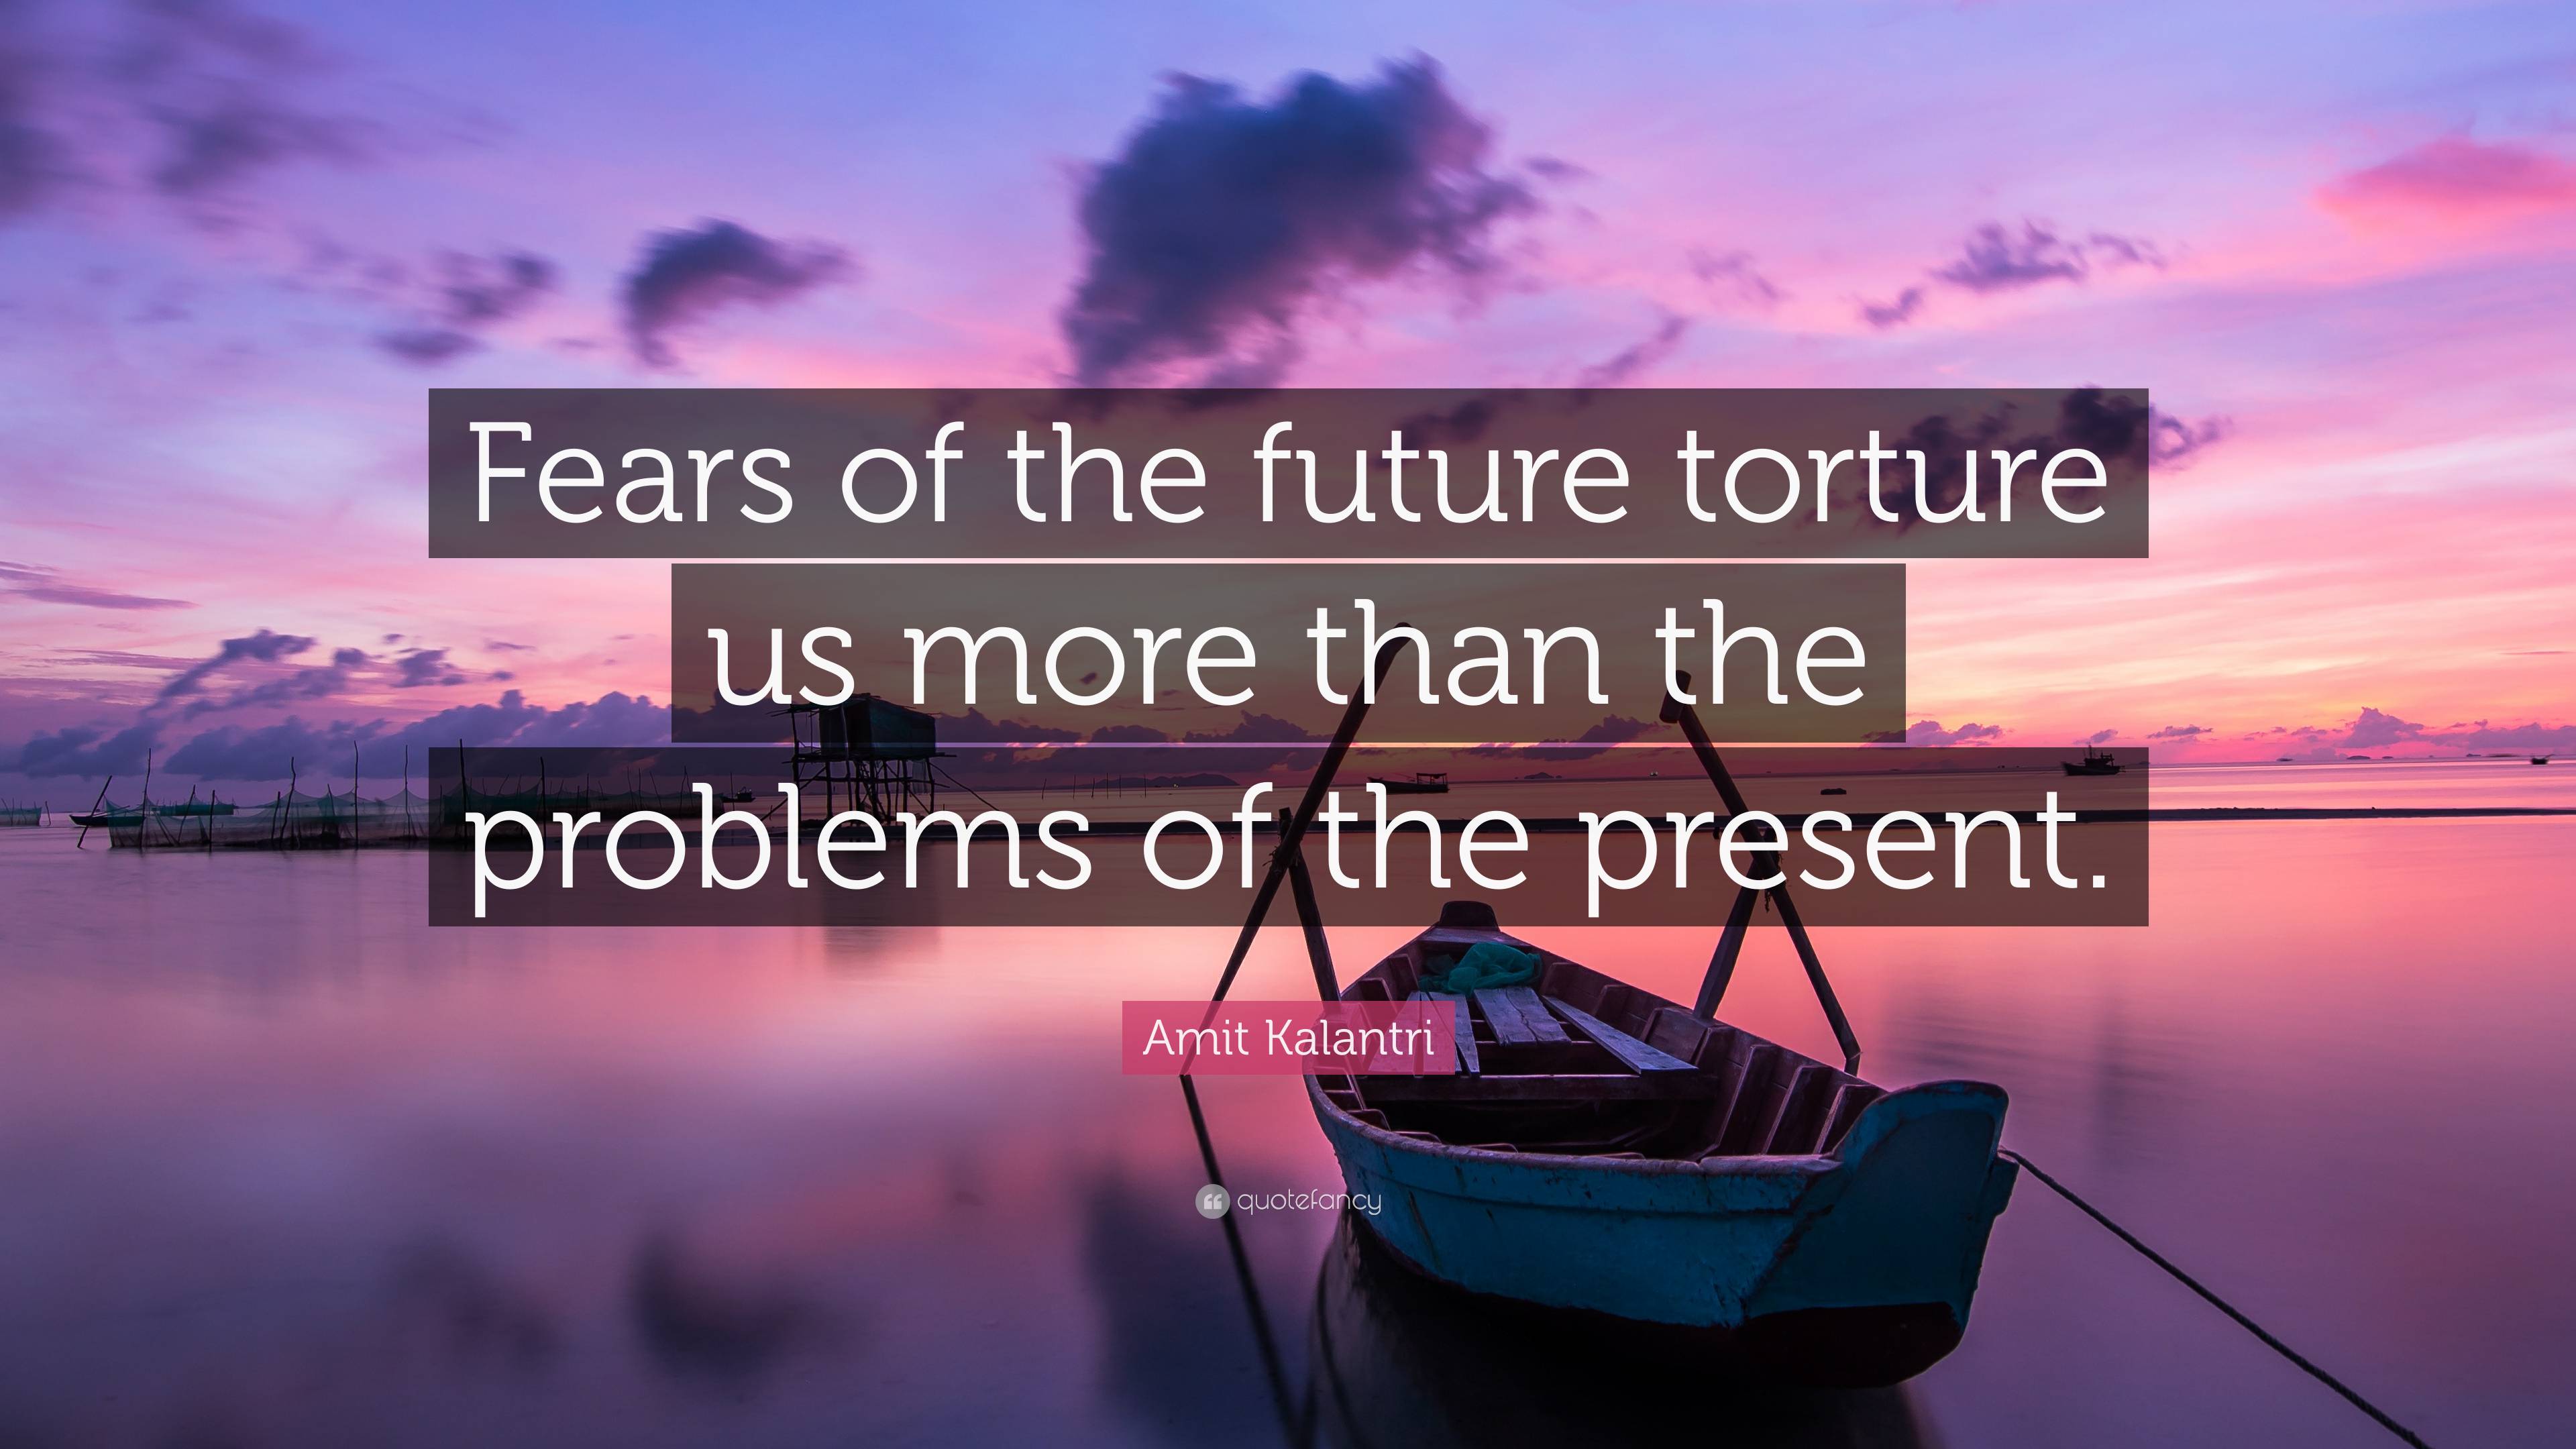 Amit Kalantri Quote: “Fears of the future torture us more than the ...